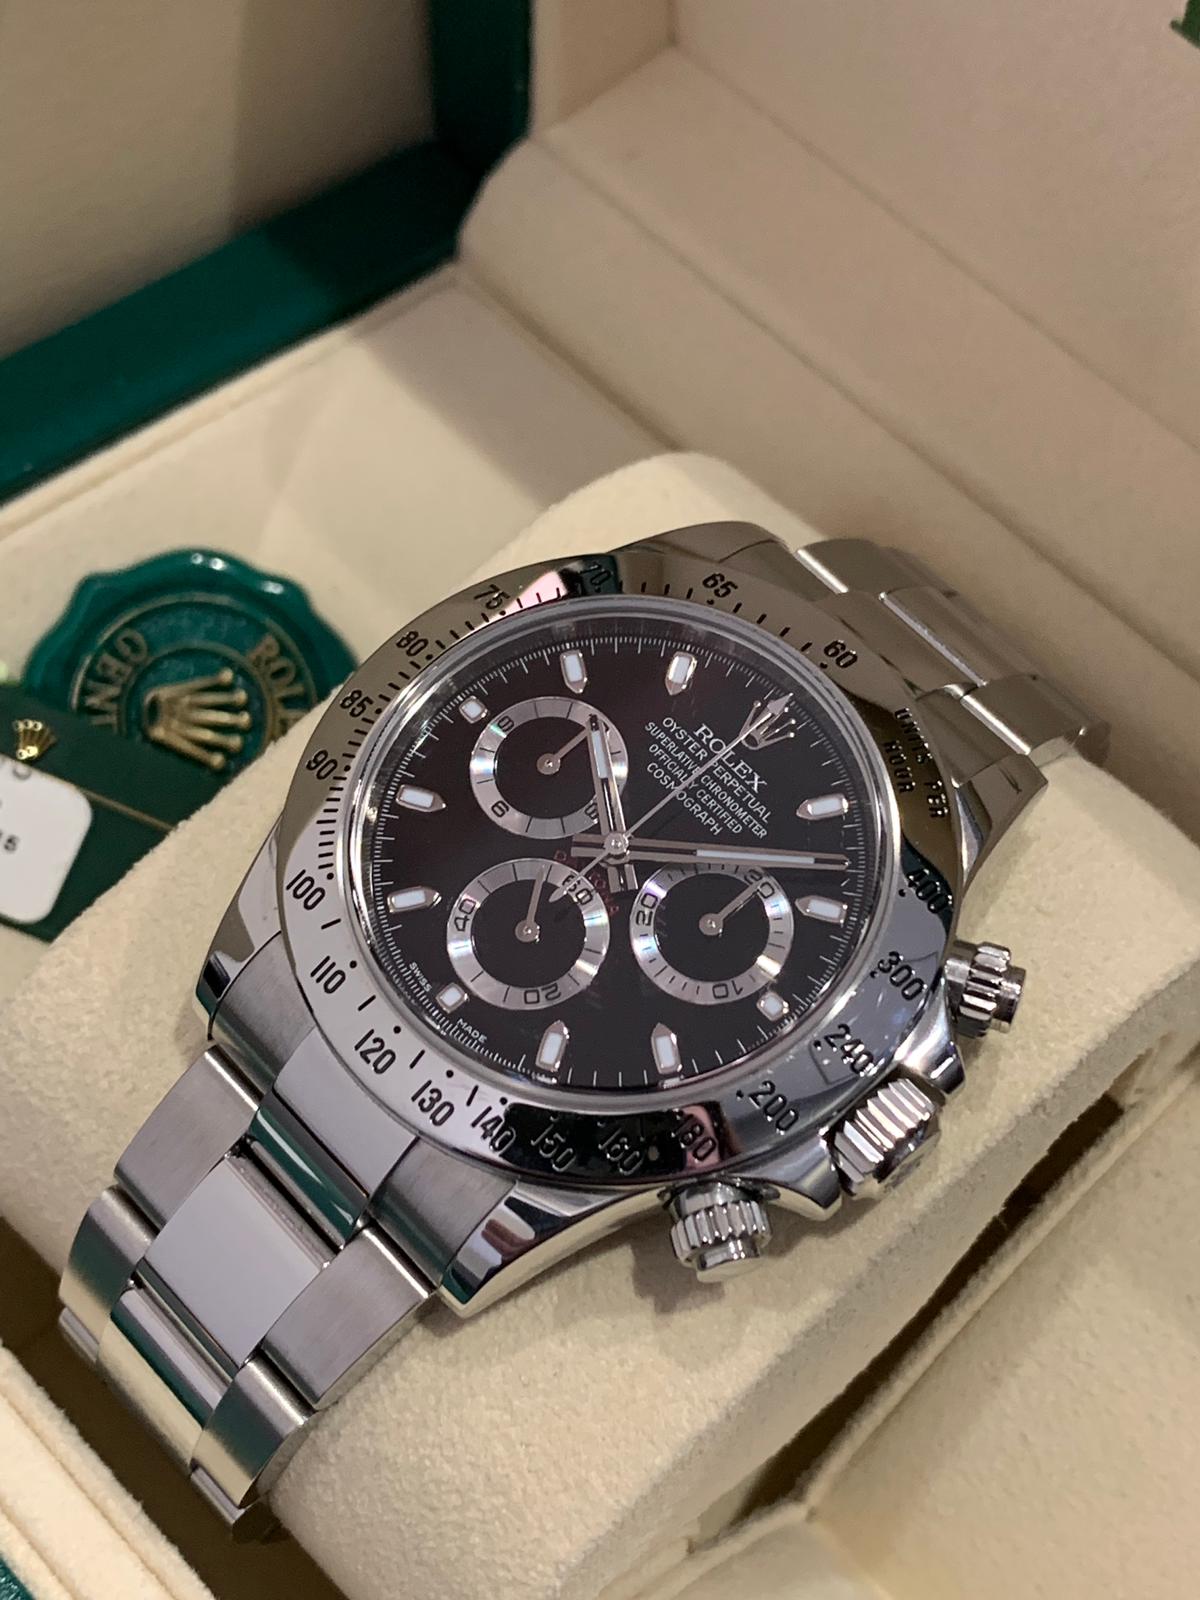 Rolex Cosmograph Daytona stainless steel - Carr Watches Rolex Cosmograph Daytona Stainless Steel Price